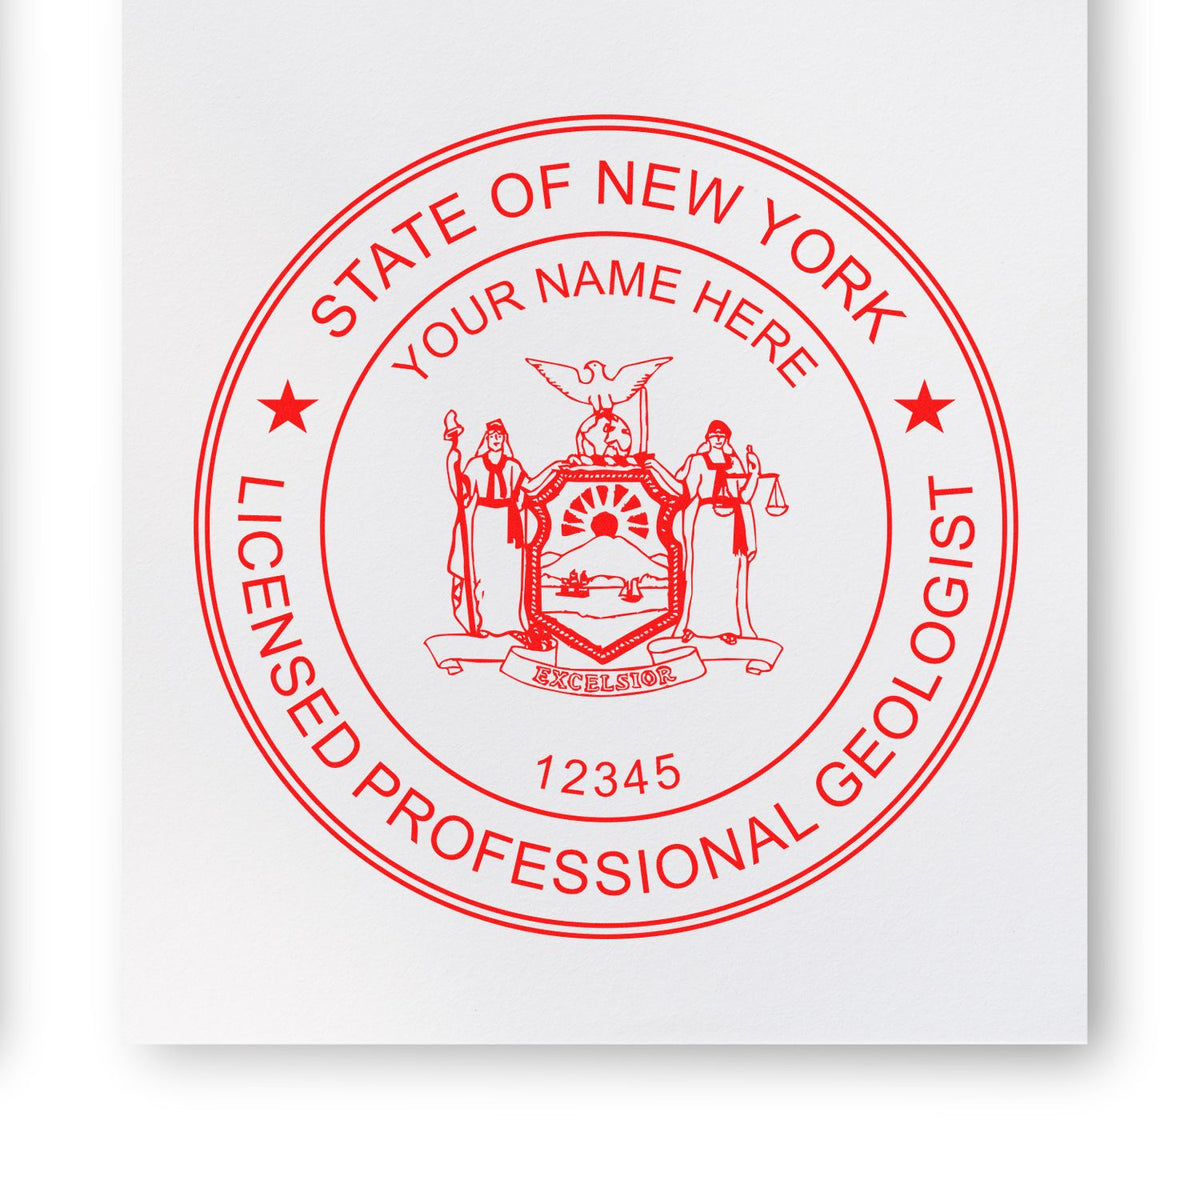 The Premium MaxLight Pre-Inked New York Geology Stamp stamp impression comes to life with a crisp, detailed image stamped on paper - showcasing true professional quality.